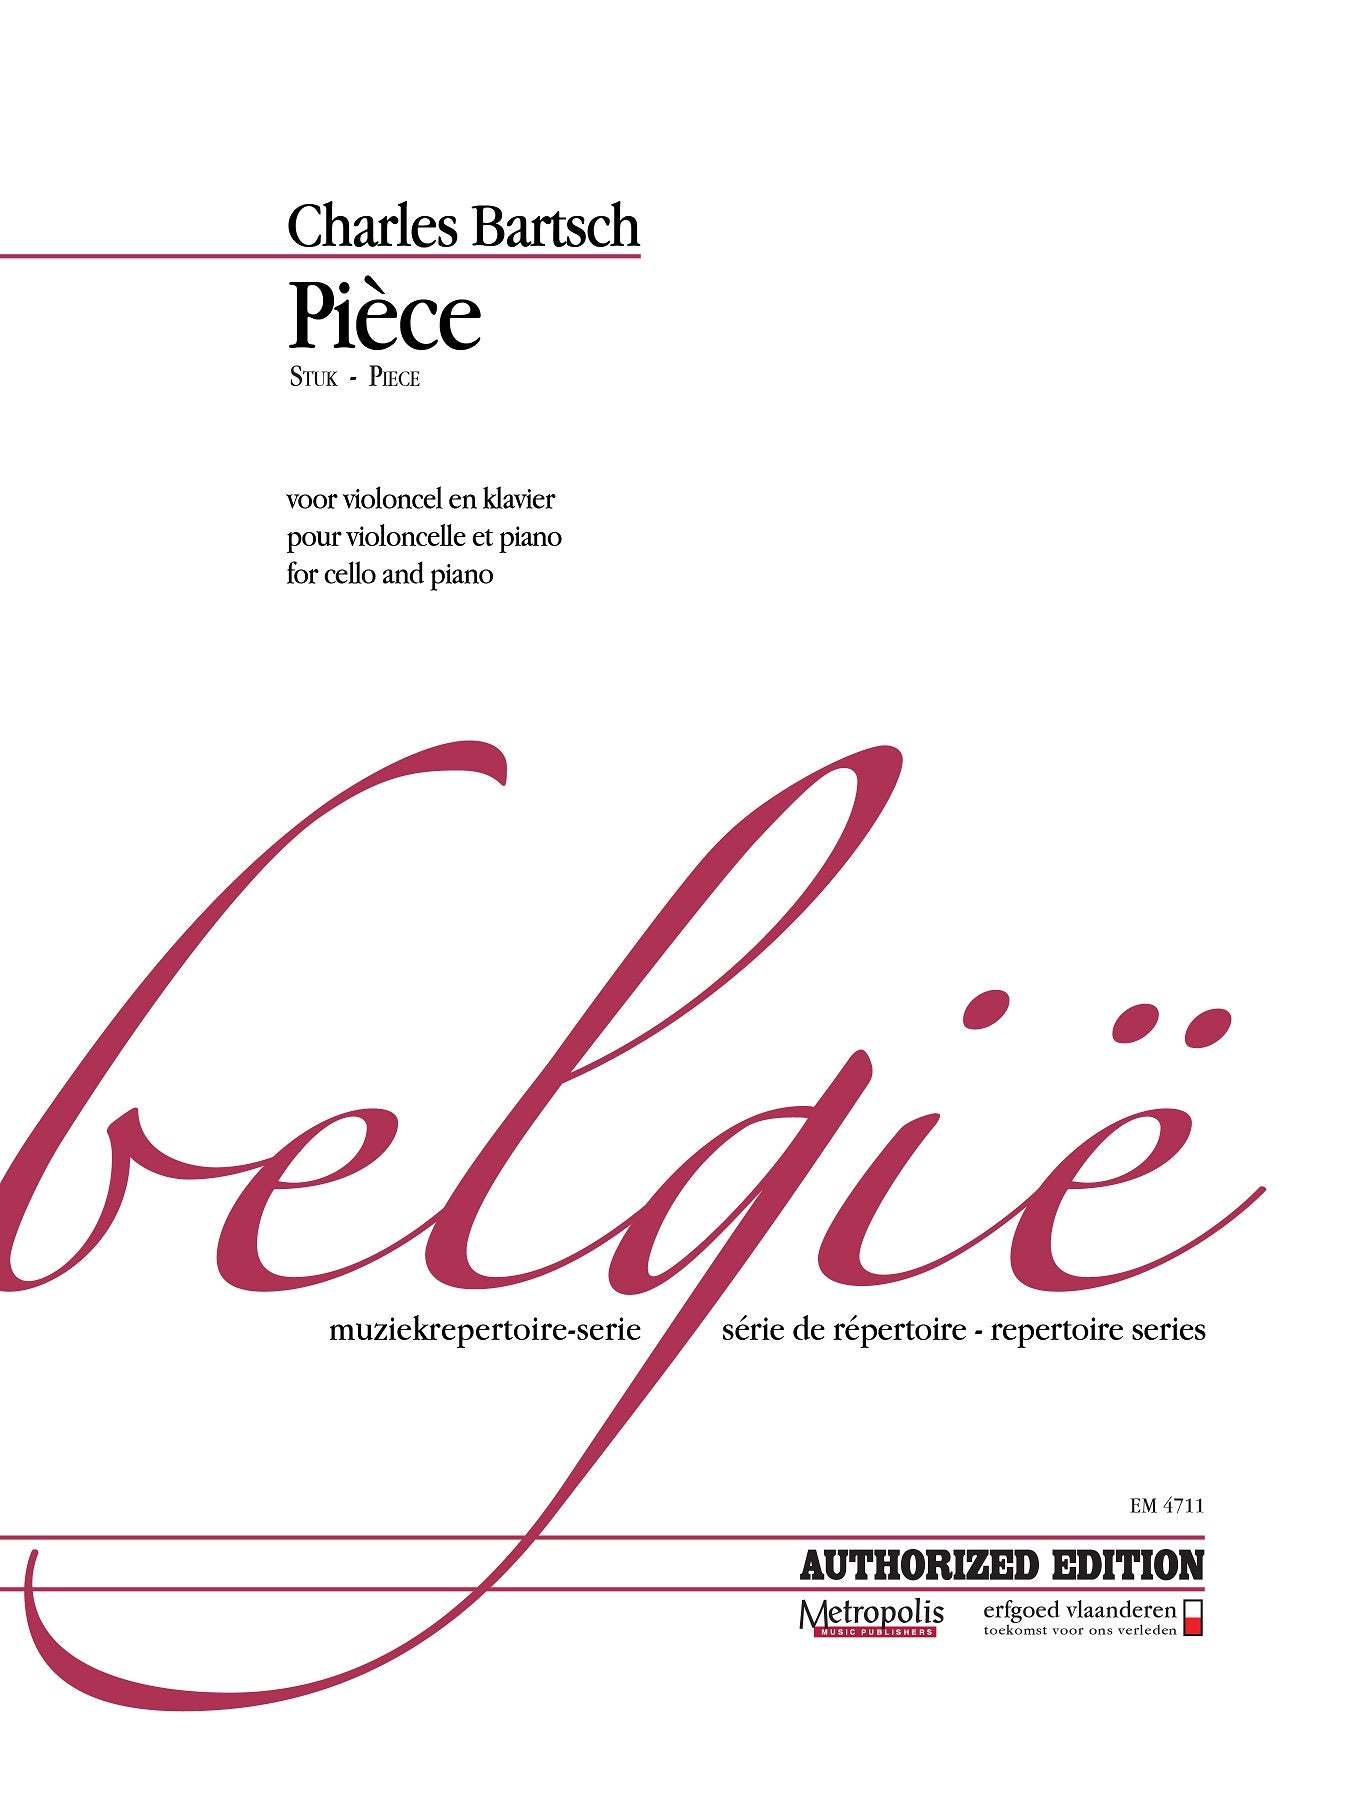 Bartsch: Pièce for Cello and Piano